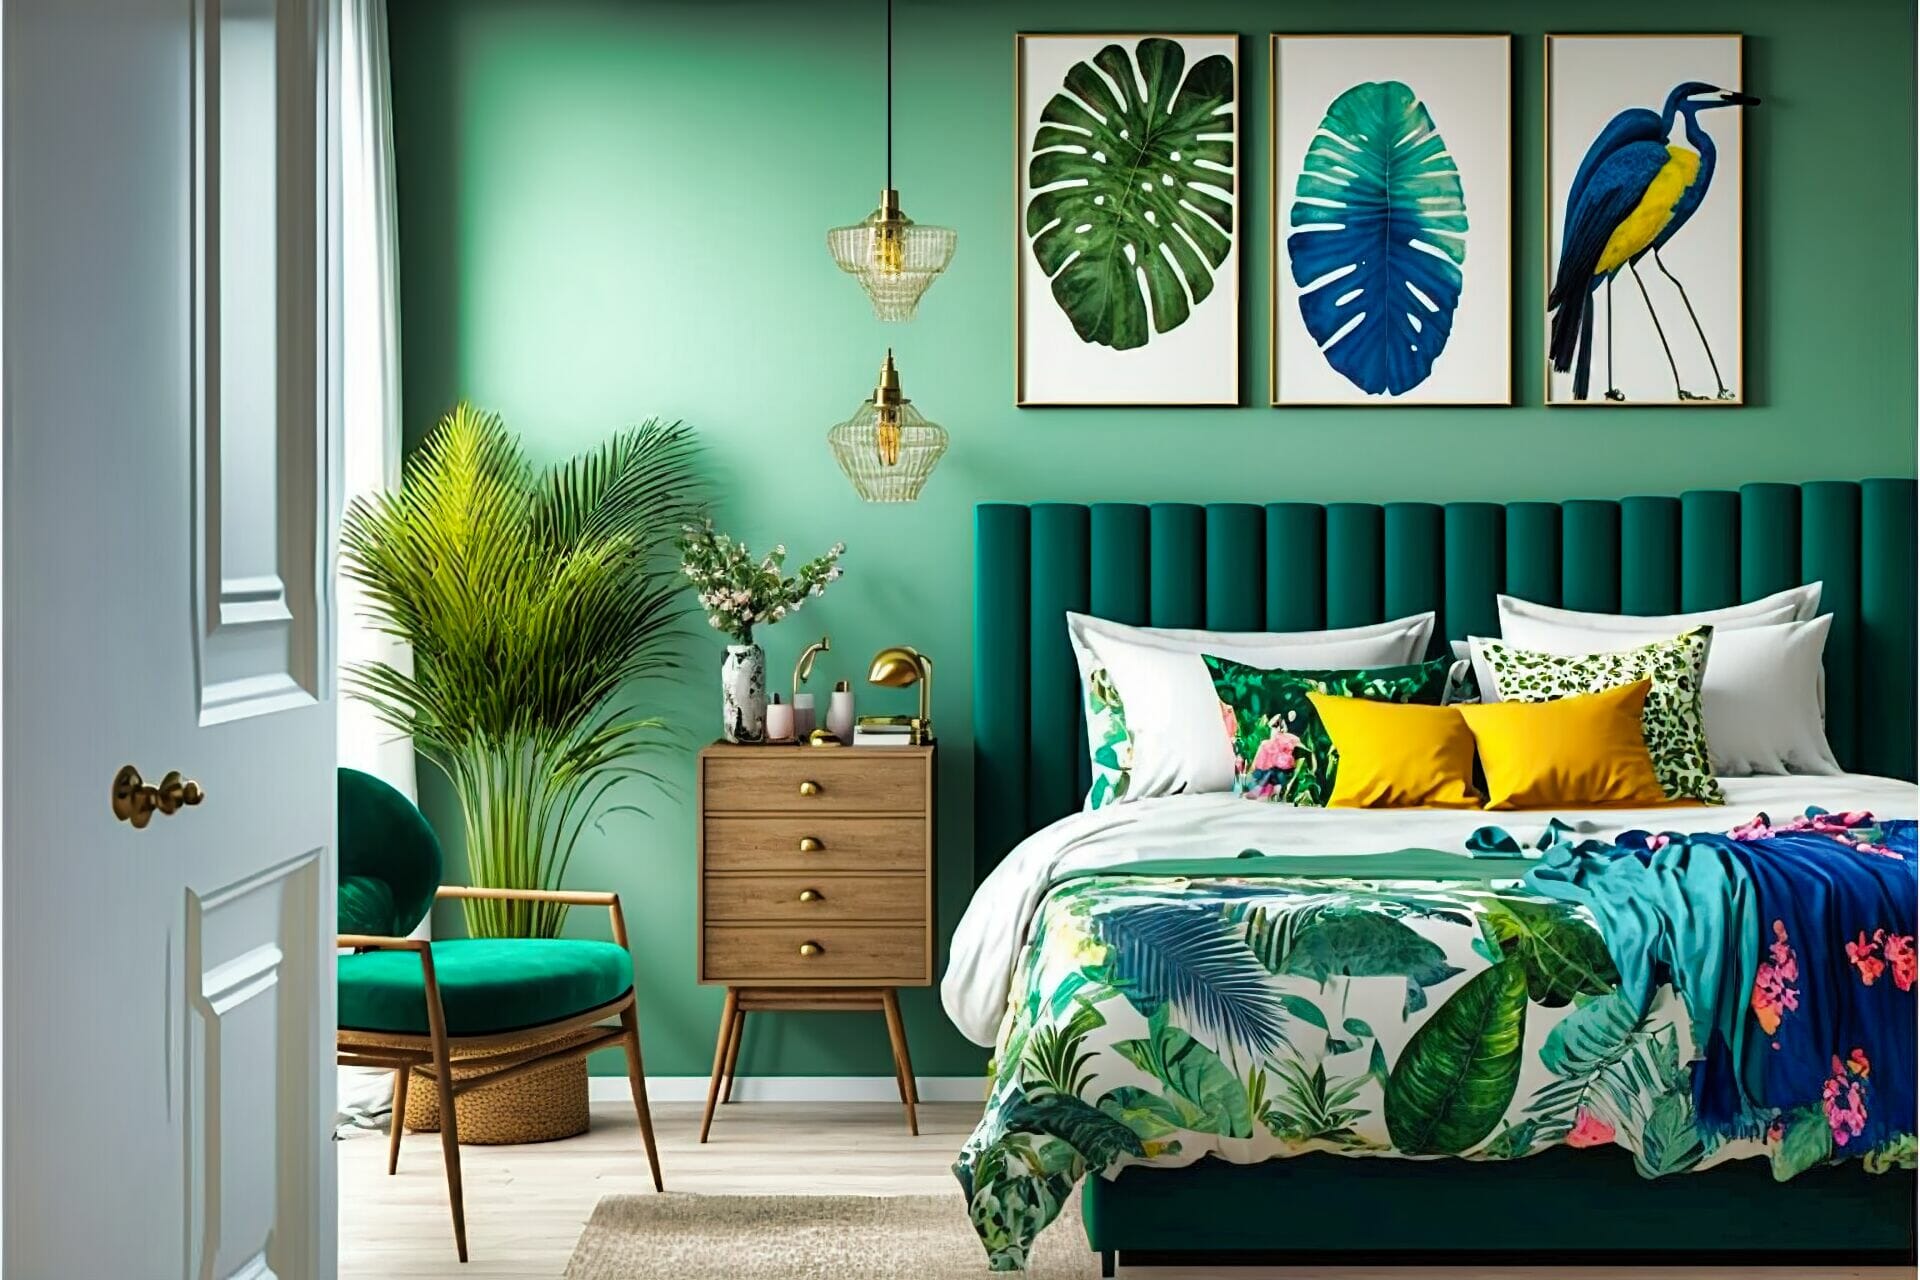 A Scandinavian Style Bedroom With Bright Tropical Accents – This Bedroom Is Decorated With A Mix Of Bright Colors And Tropical Elements. The Walls Are A Light Green, While The Bed Frame And Nightstand Are A Dark Wood. To Complete The Look, A White Fur Rug Lies On The Floor, And Art Prints With Tropical Colors Hang On The Walls.